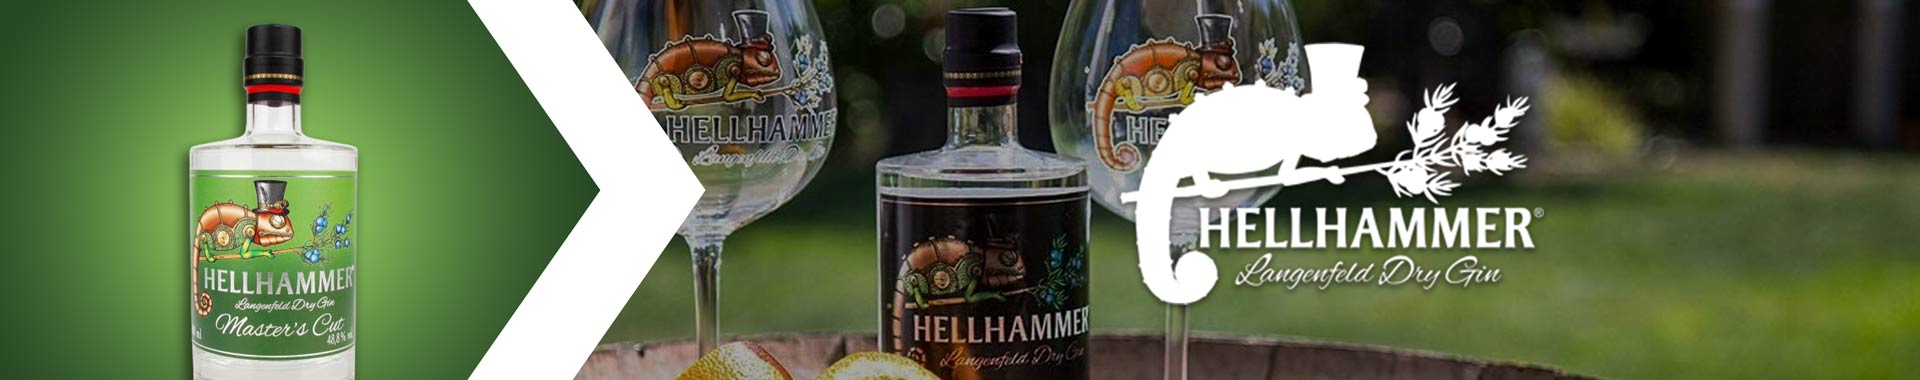 Hellhammer Gin